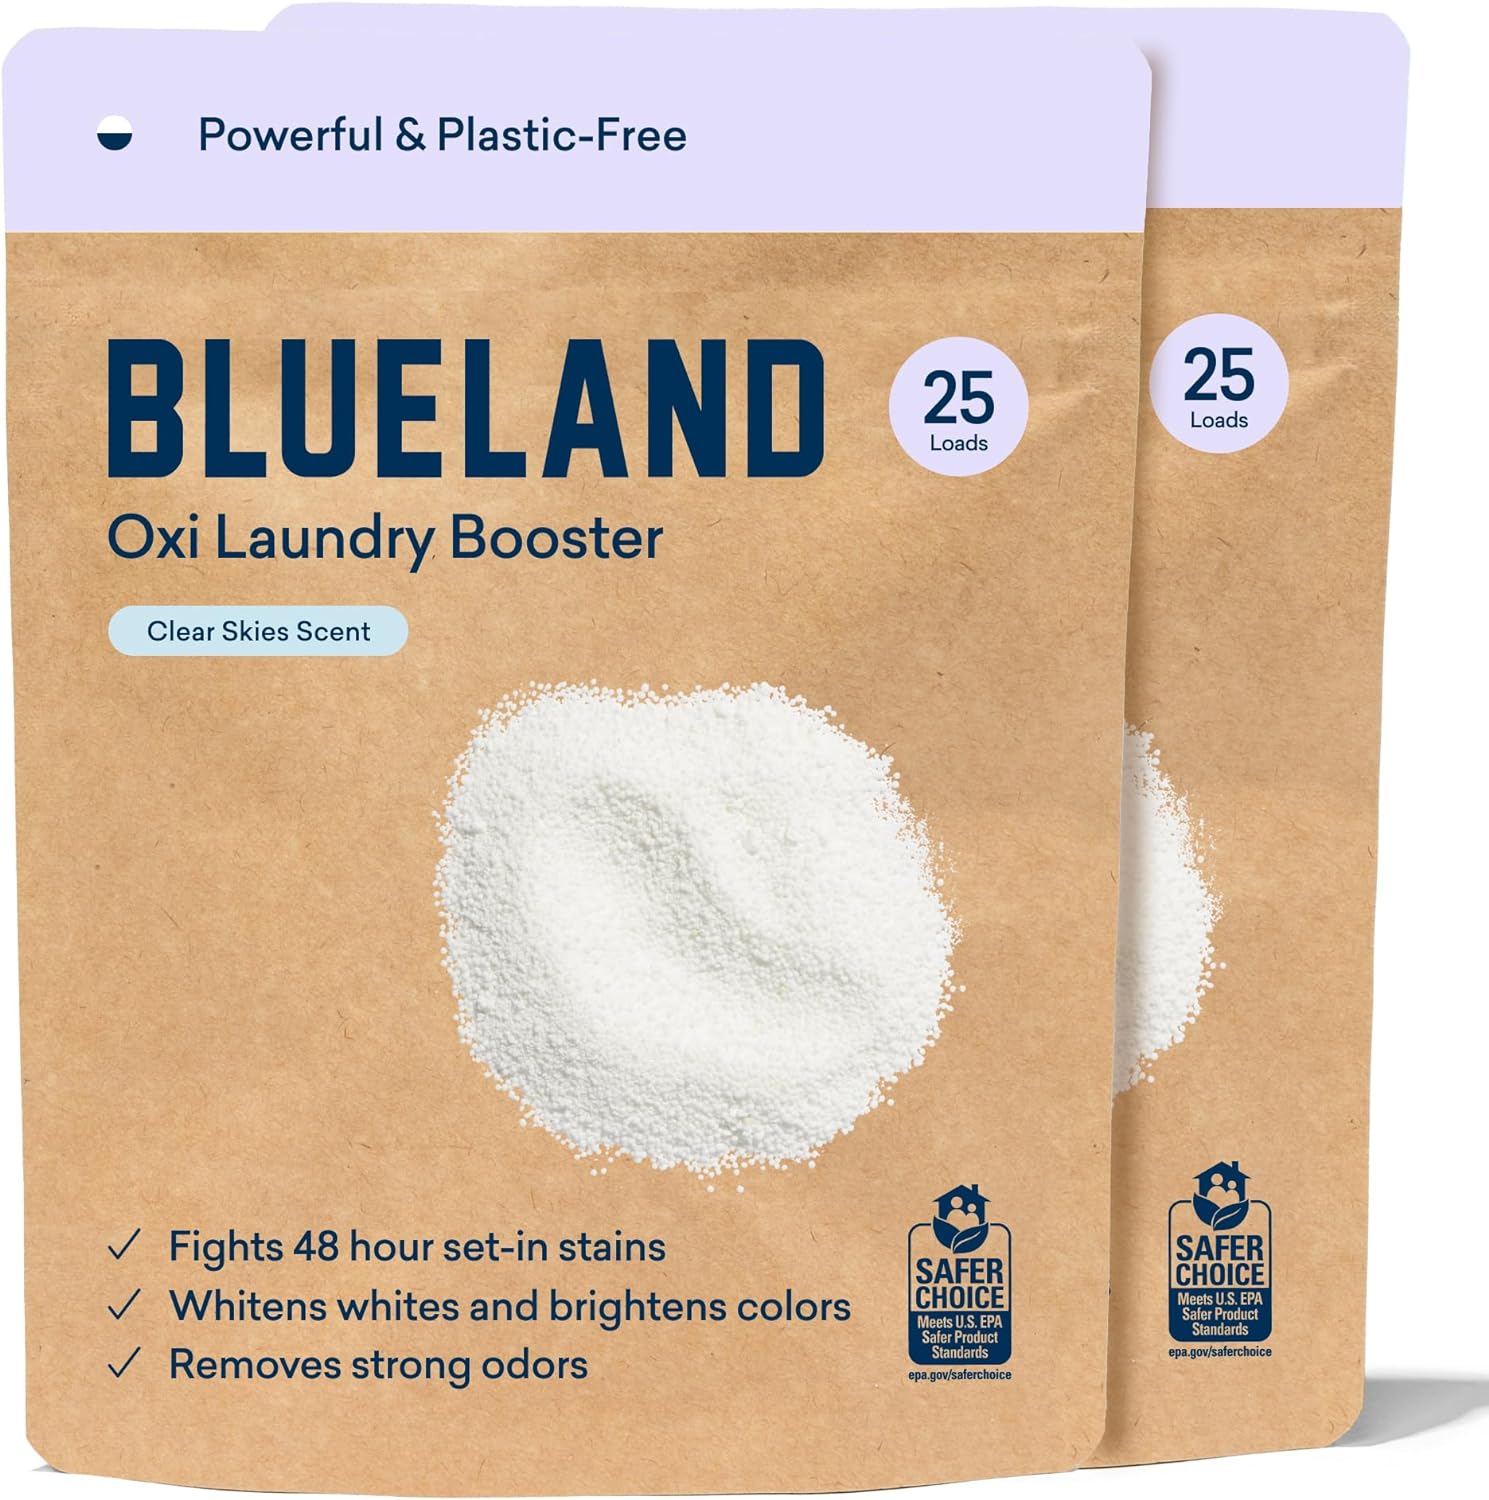 BLUELAND Oxi Laundry Booster Powder Refill 2 Pack - Plastic-Free & Eco Friendly Oxy Cleaner - Plant Based Stain Remover - Clear Skies Scented - 35.2oz, 50 Loads